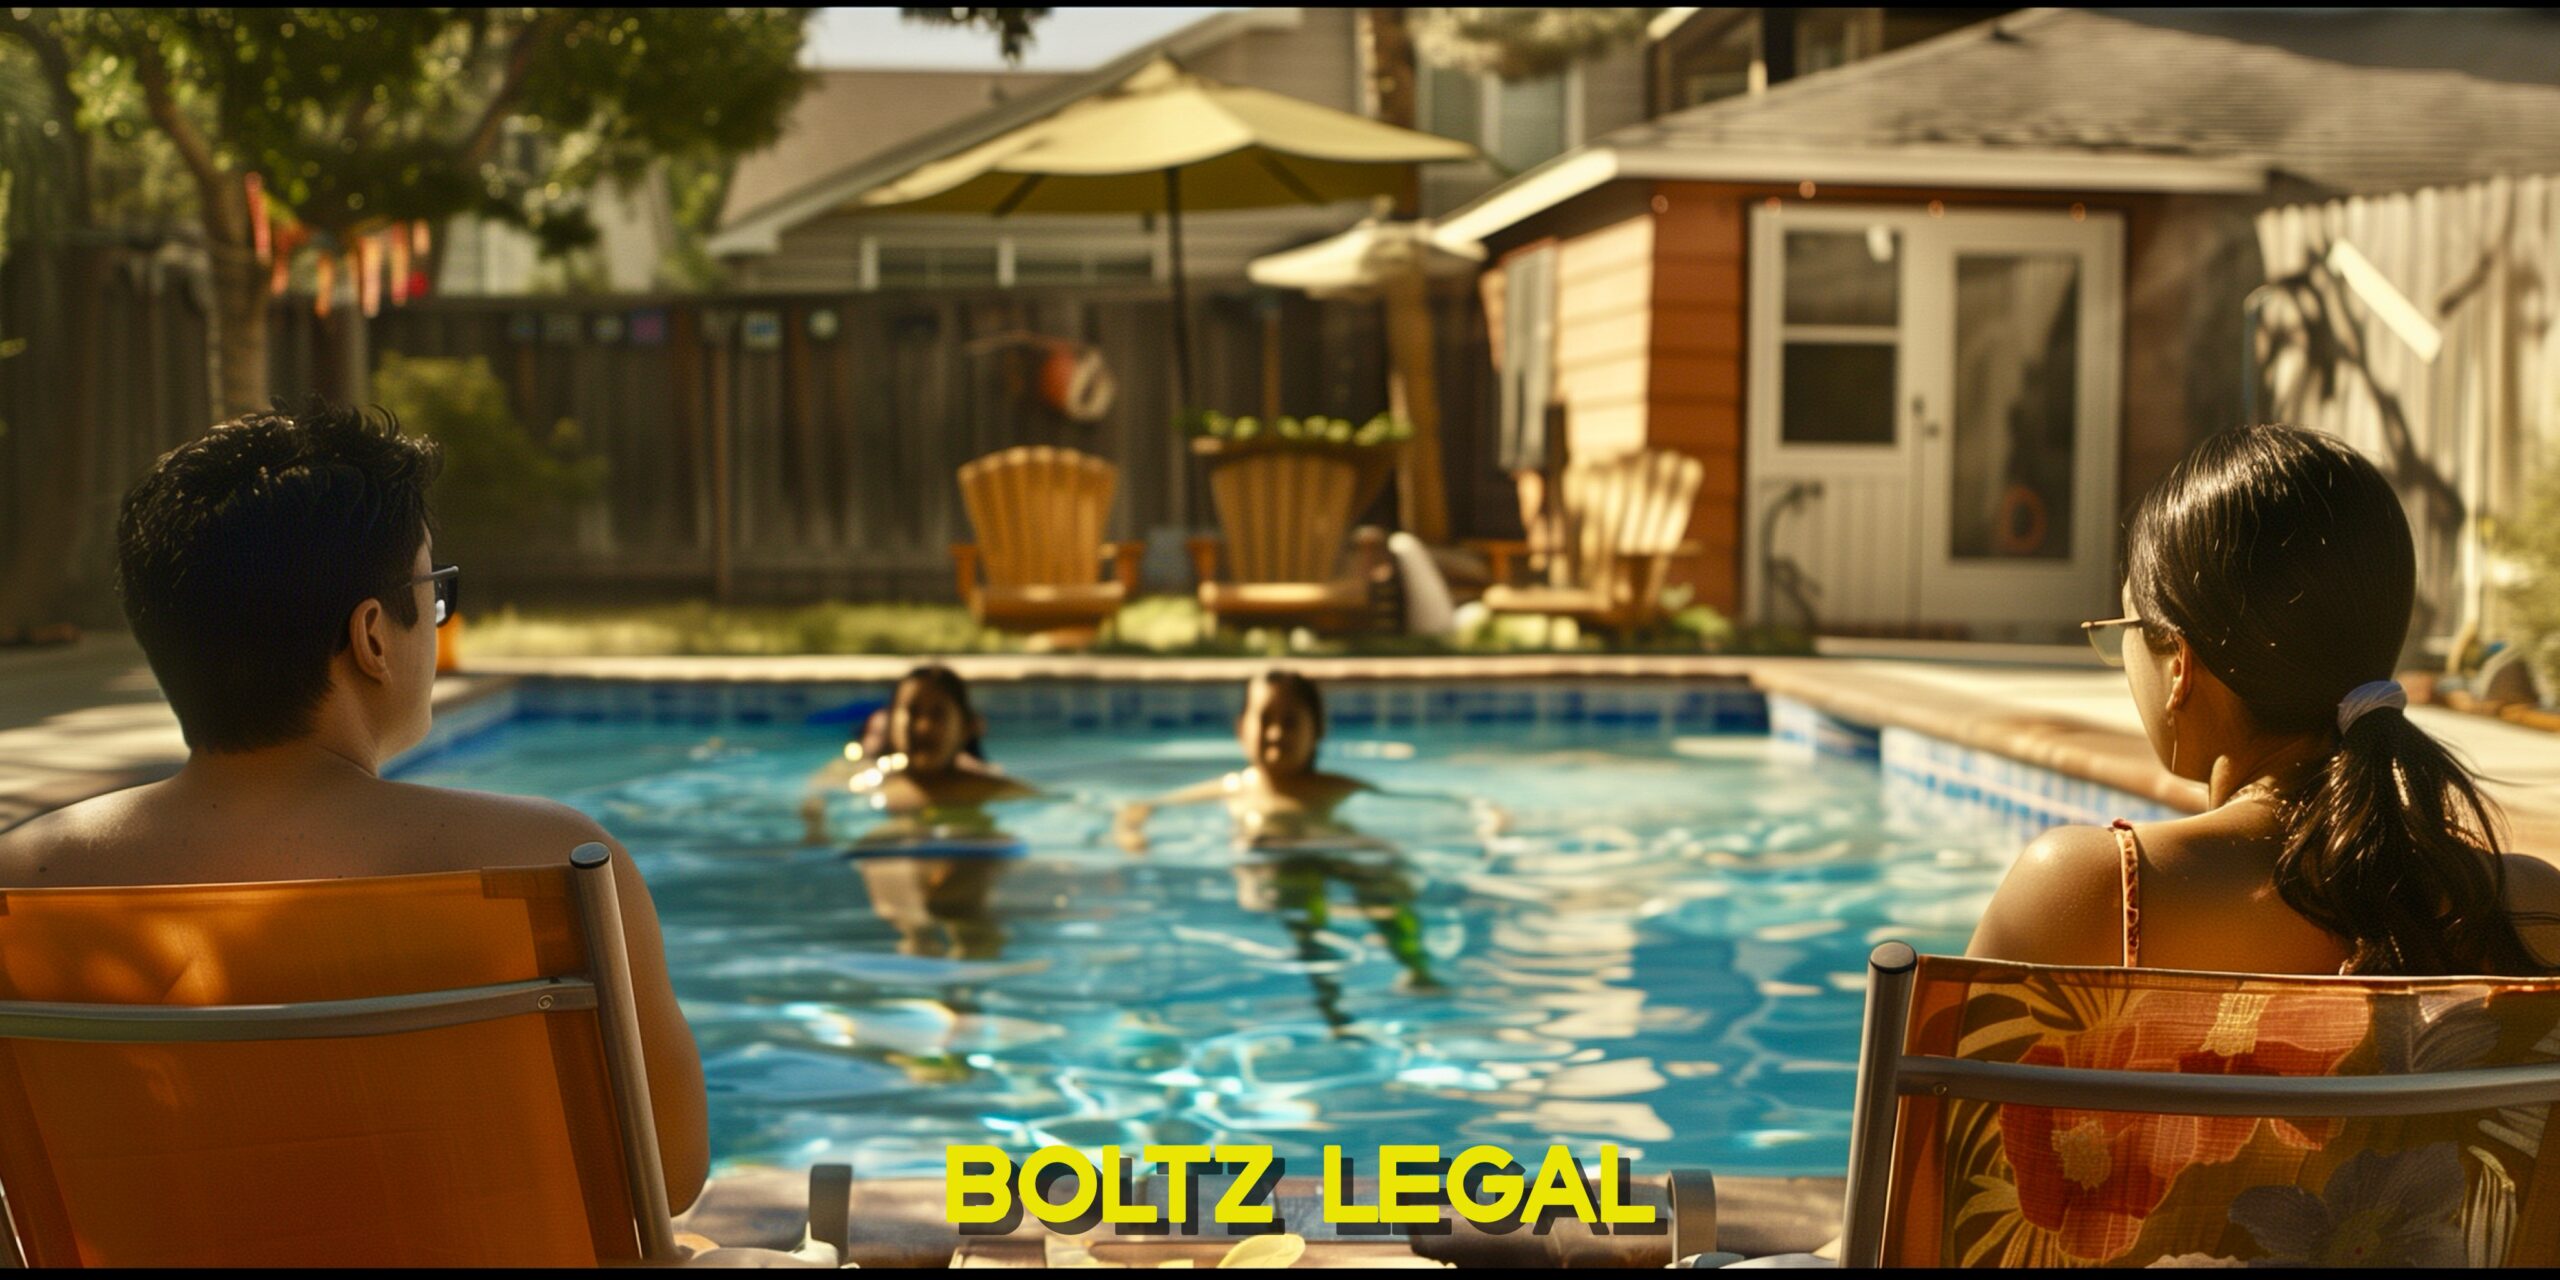 5 Essential Water Safety Tips to Prevent Child Drowning - Boltz Legal ...